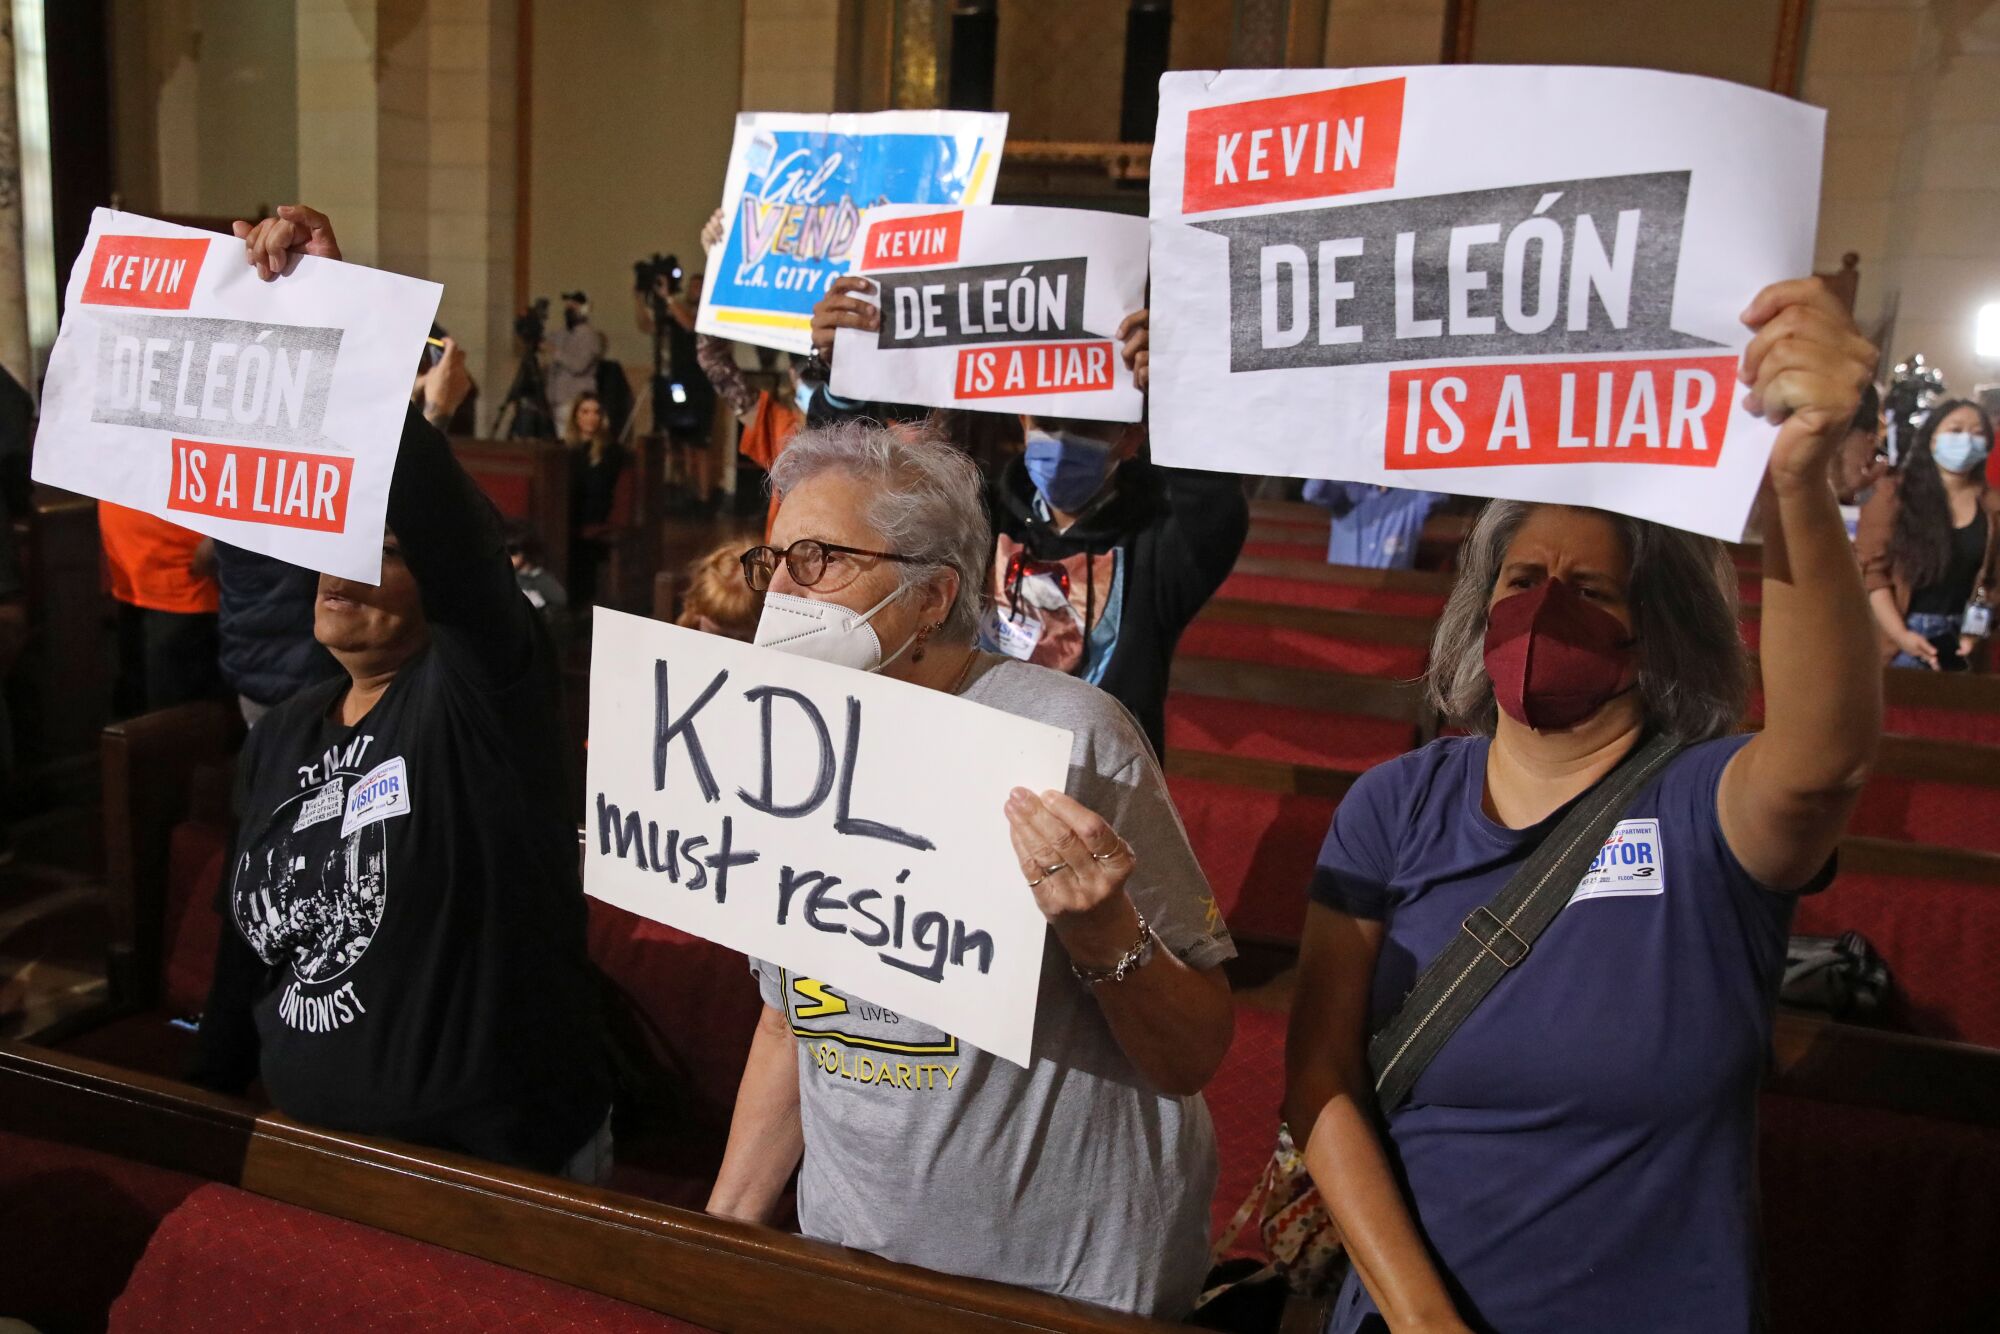  Protesters hold up signs for Kevin De León to resign.